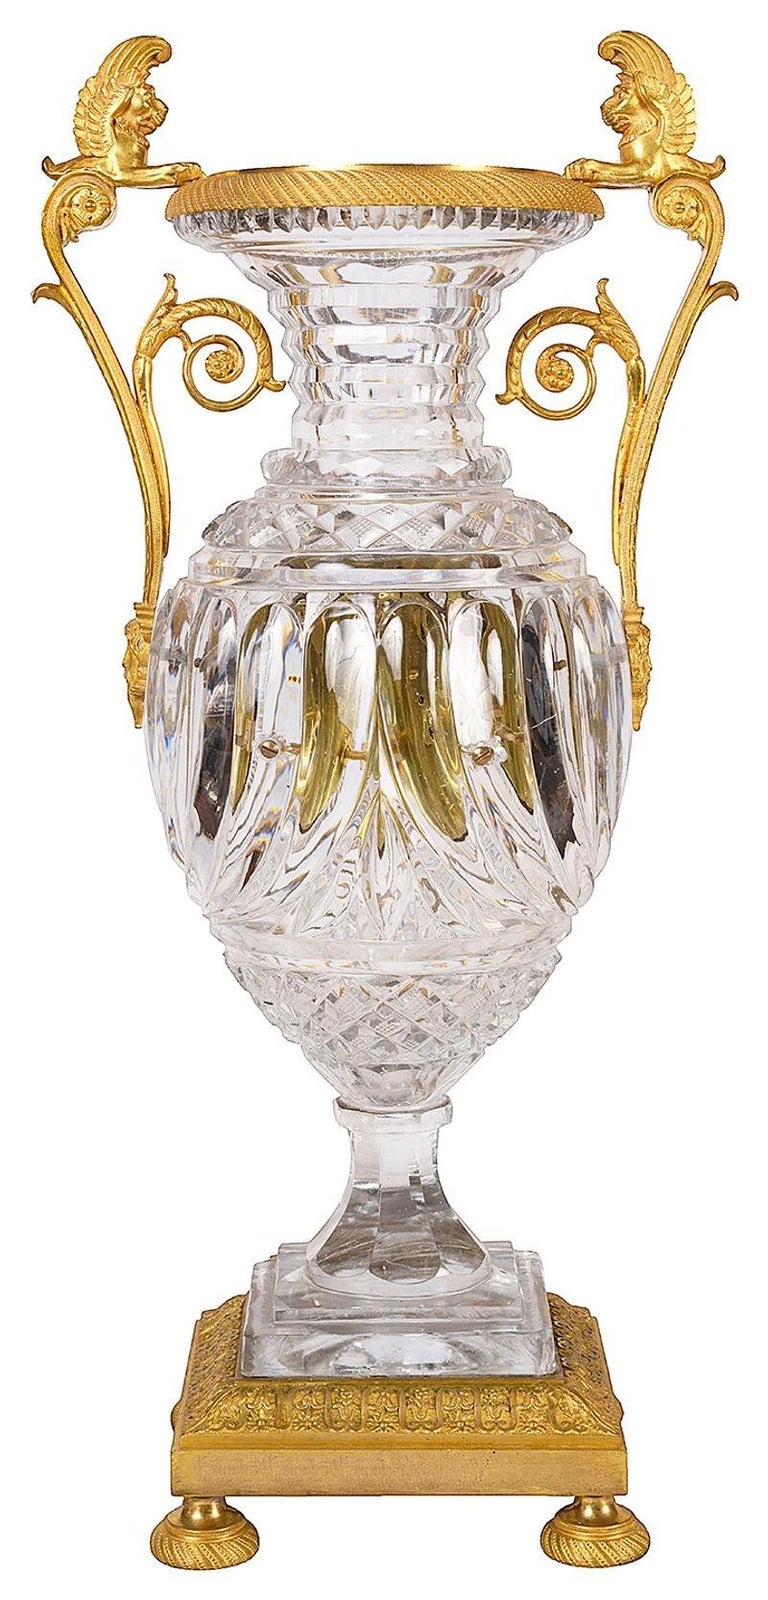 Fine Quality French Empire Baccarat Style Crystal Vase Clock, circa 1860 For Sale 2